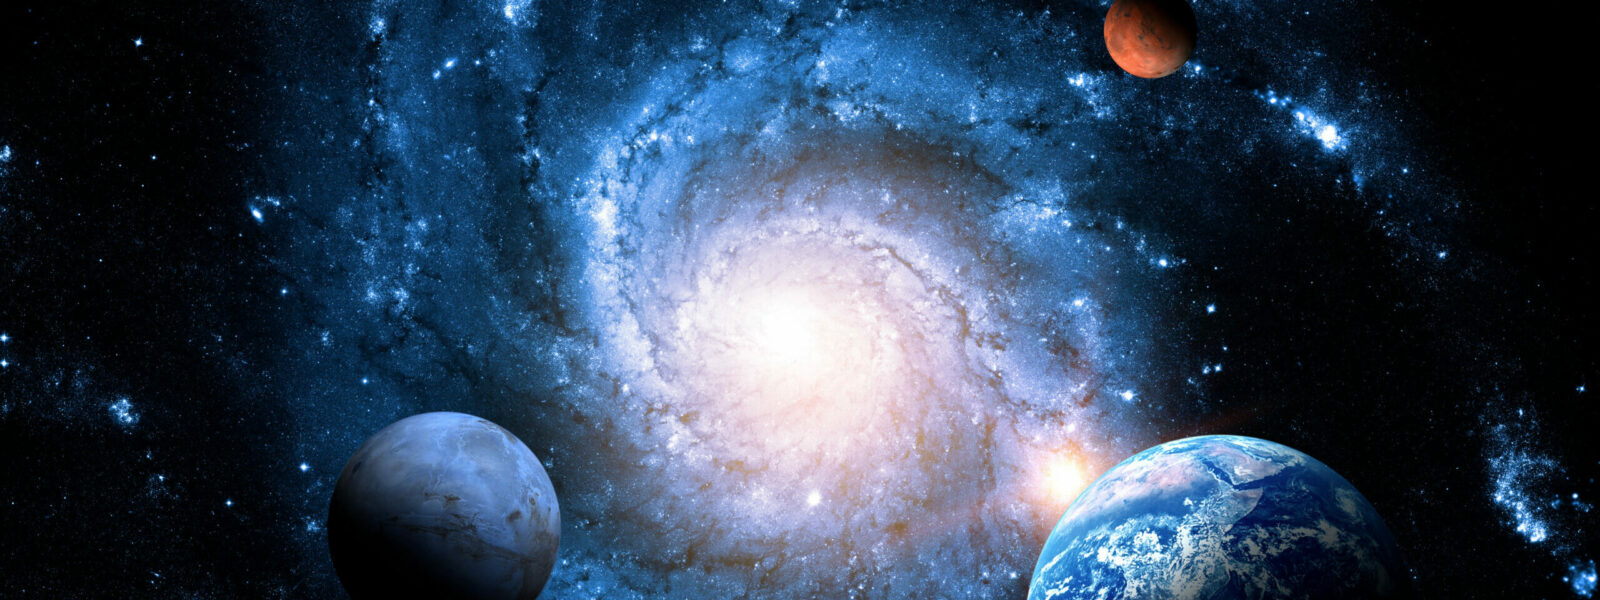 Planets of the solar system against the background of a spiral galaxy in space.